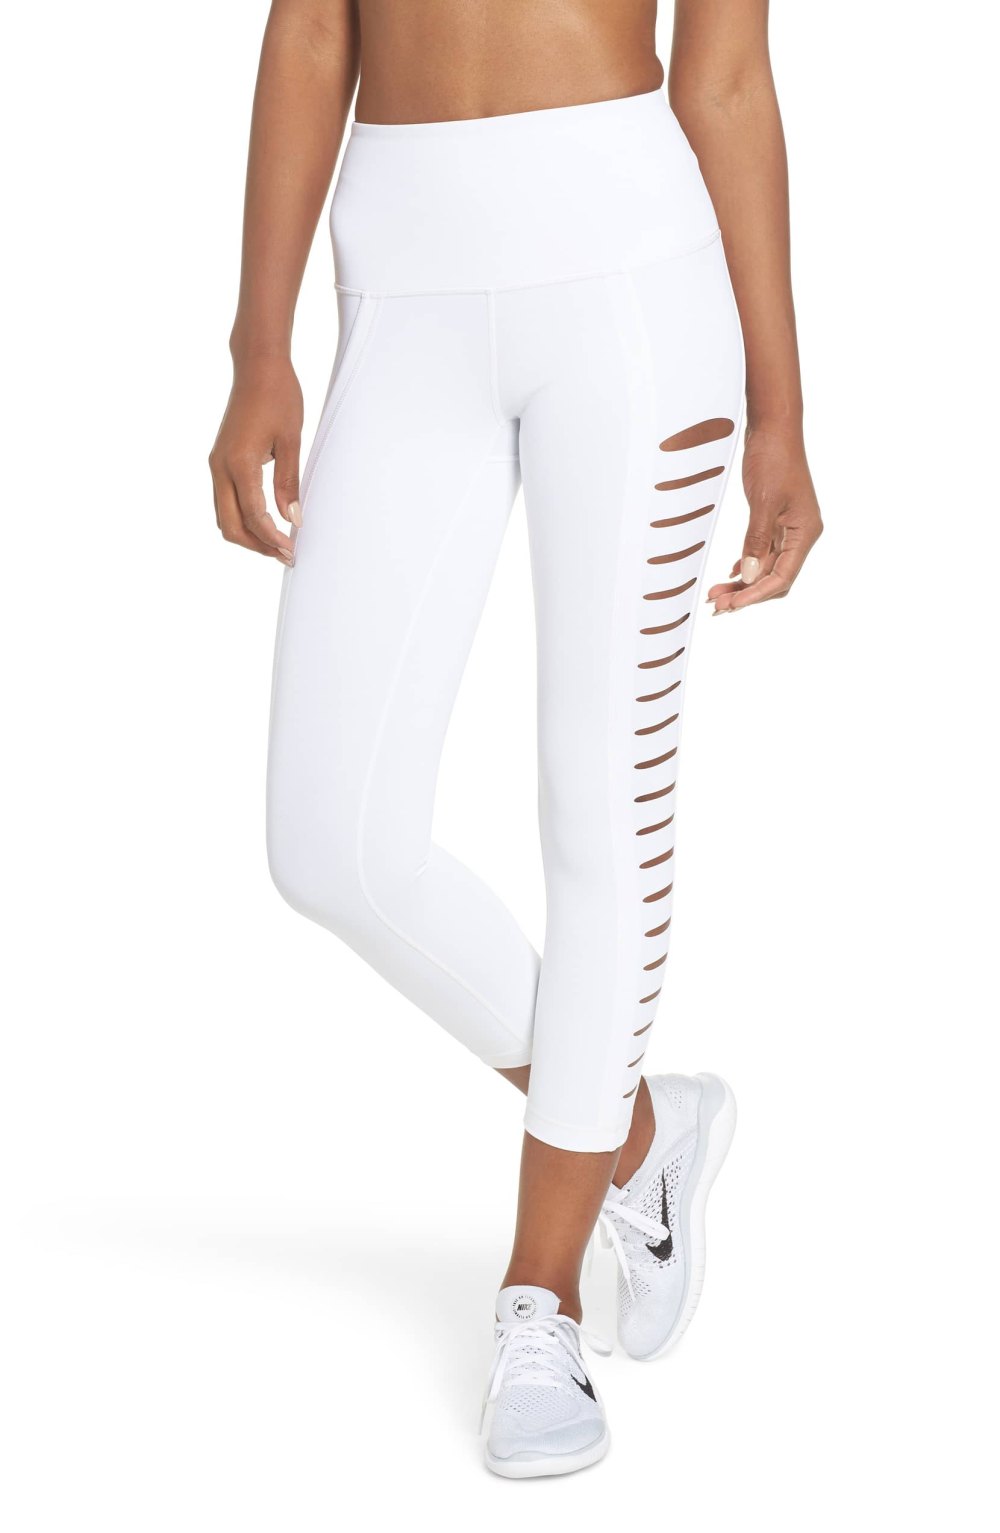 These Zella Hatha High Waist Leggings Are 50% Off at Nordstrom